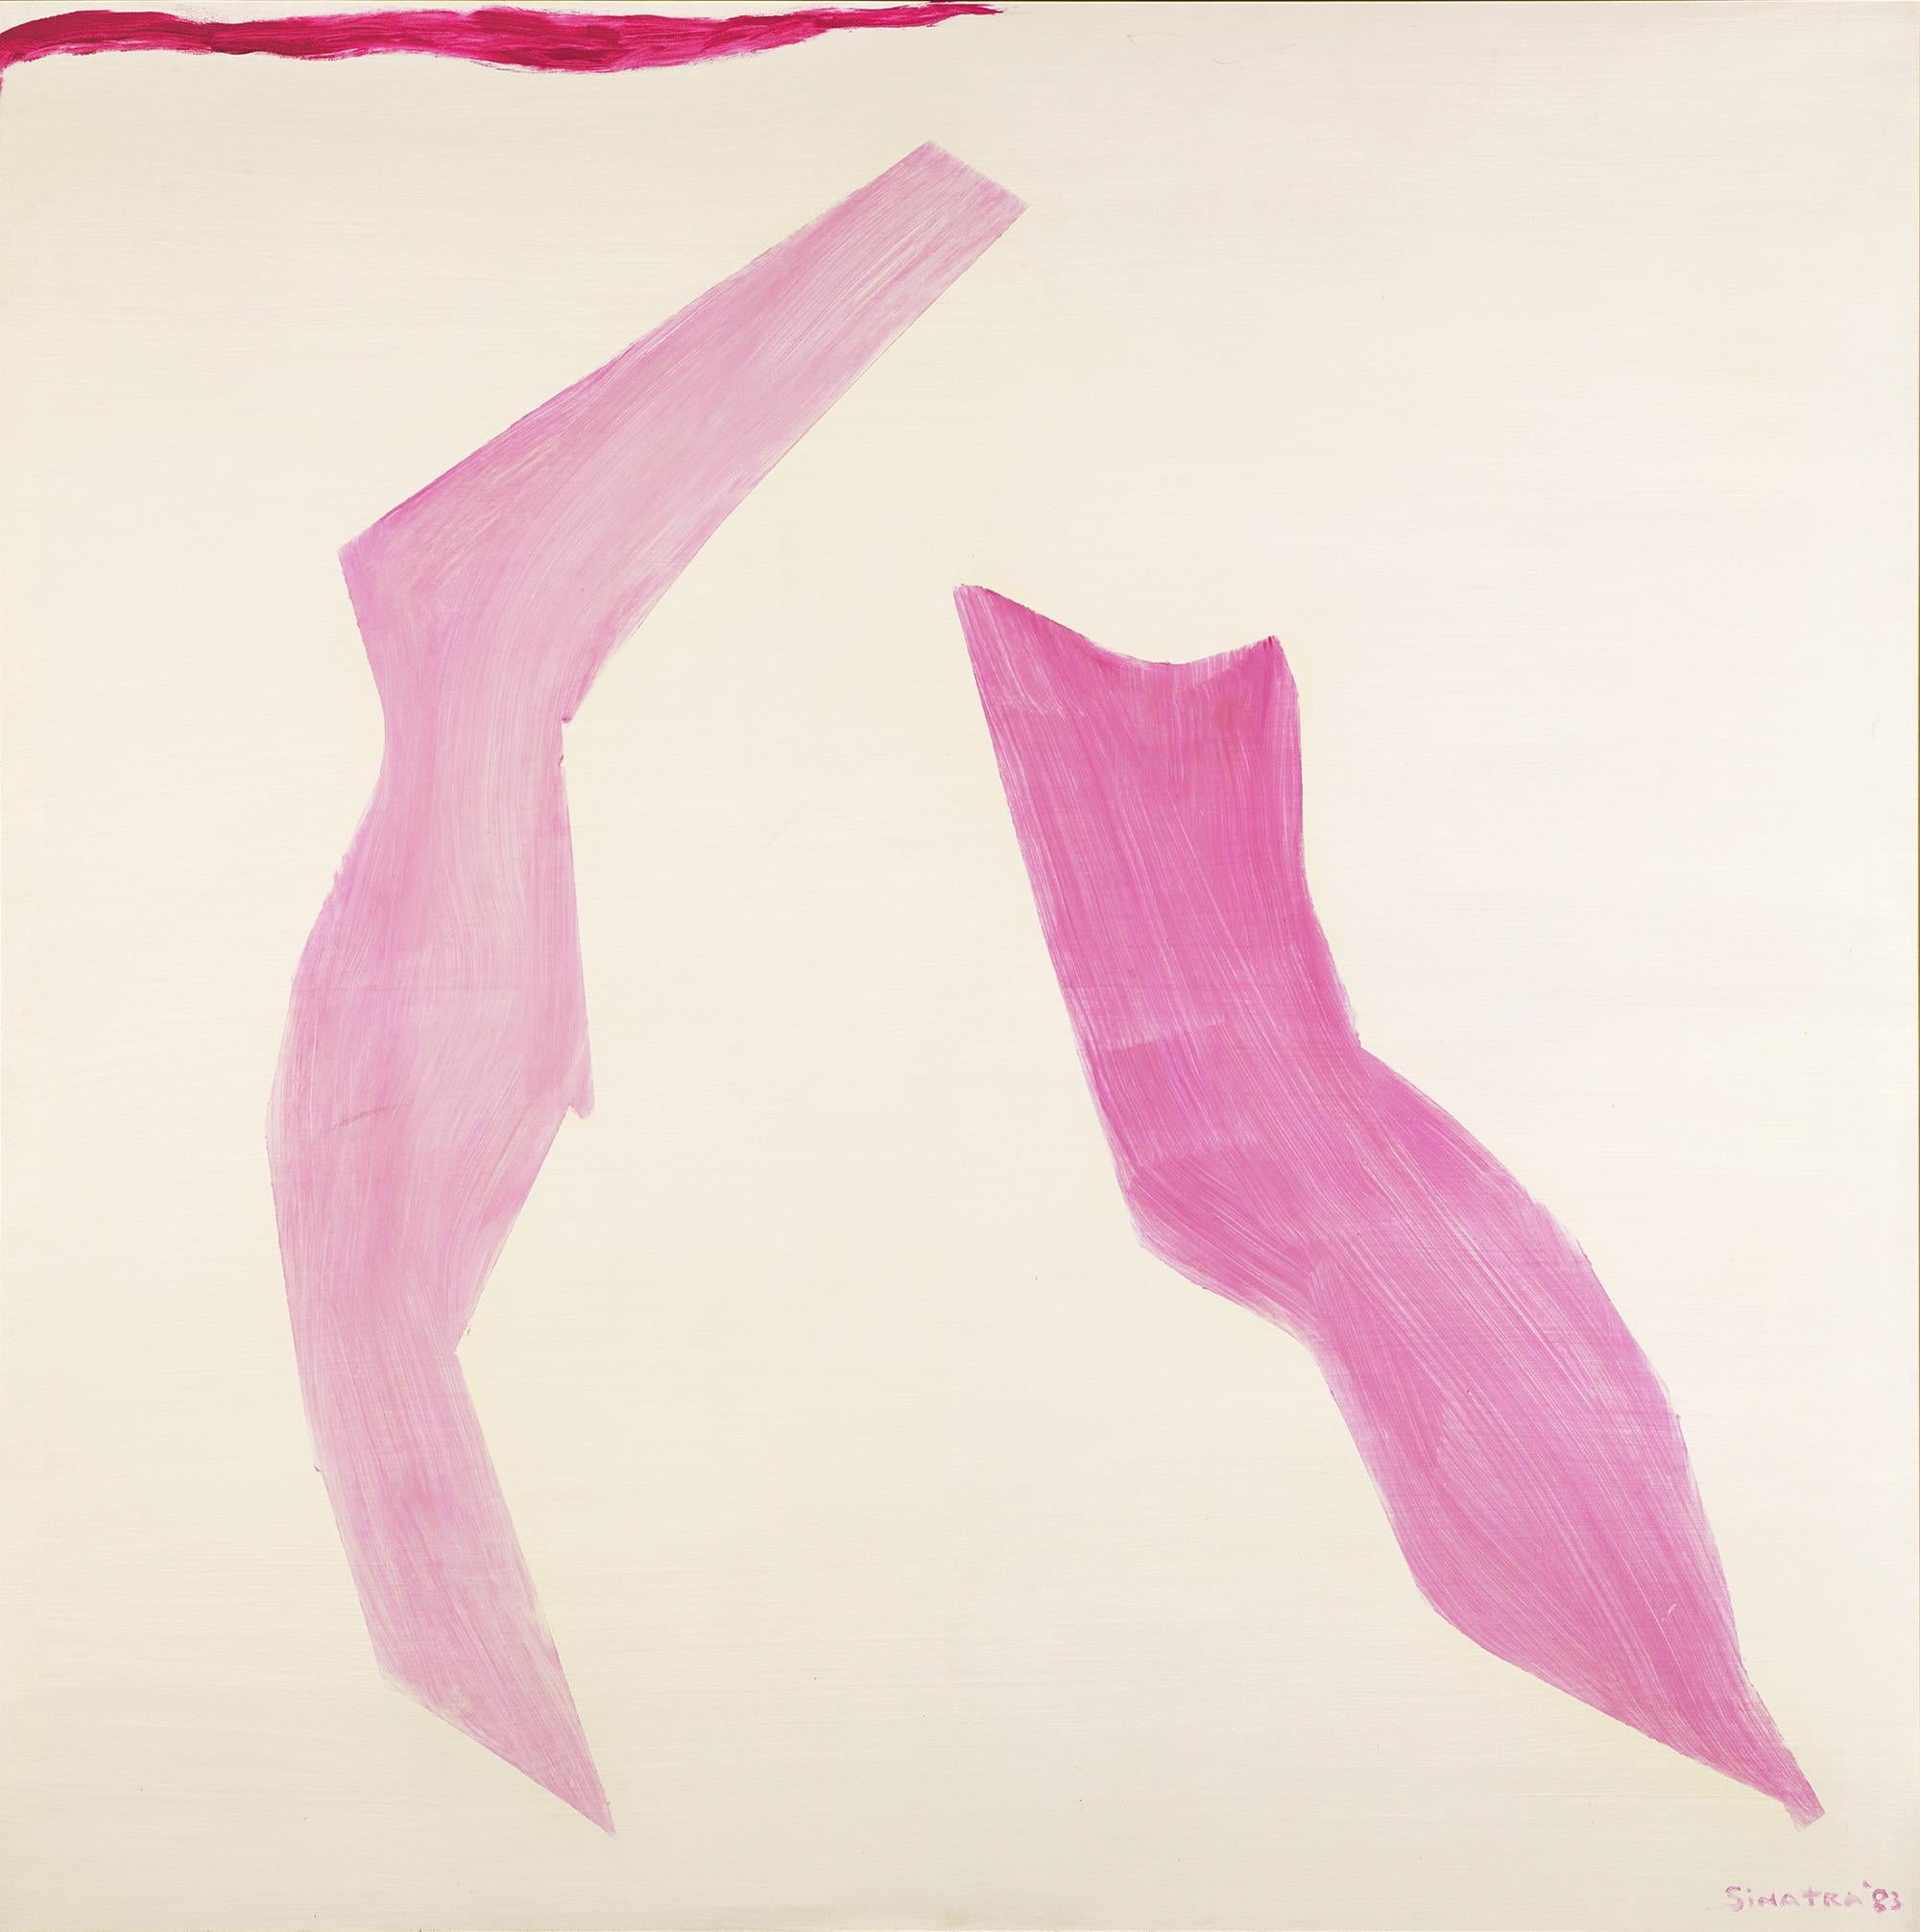 Frank Sinatra
1915-1998 | American

Abstract in Pink, Purple, and White by Frank Sinatra

Signed and dated "Sinatra '83"(lower right)
Oil on canvas

Widely considered the greatest American singer of pop music of the 20th century, Frank Sinatra was